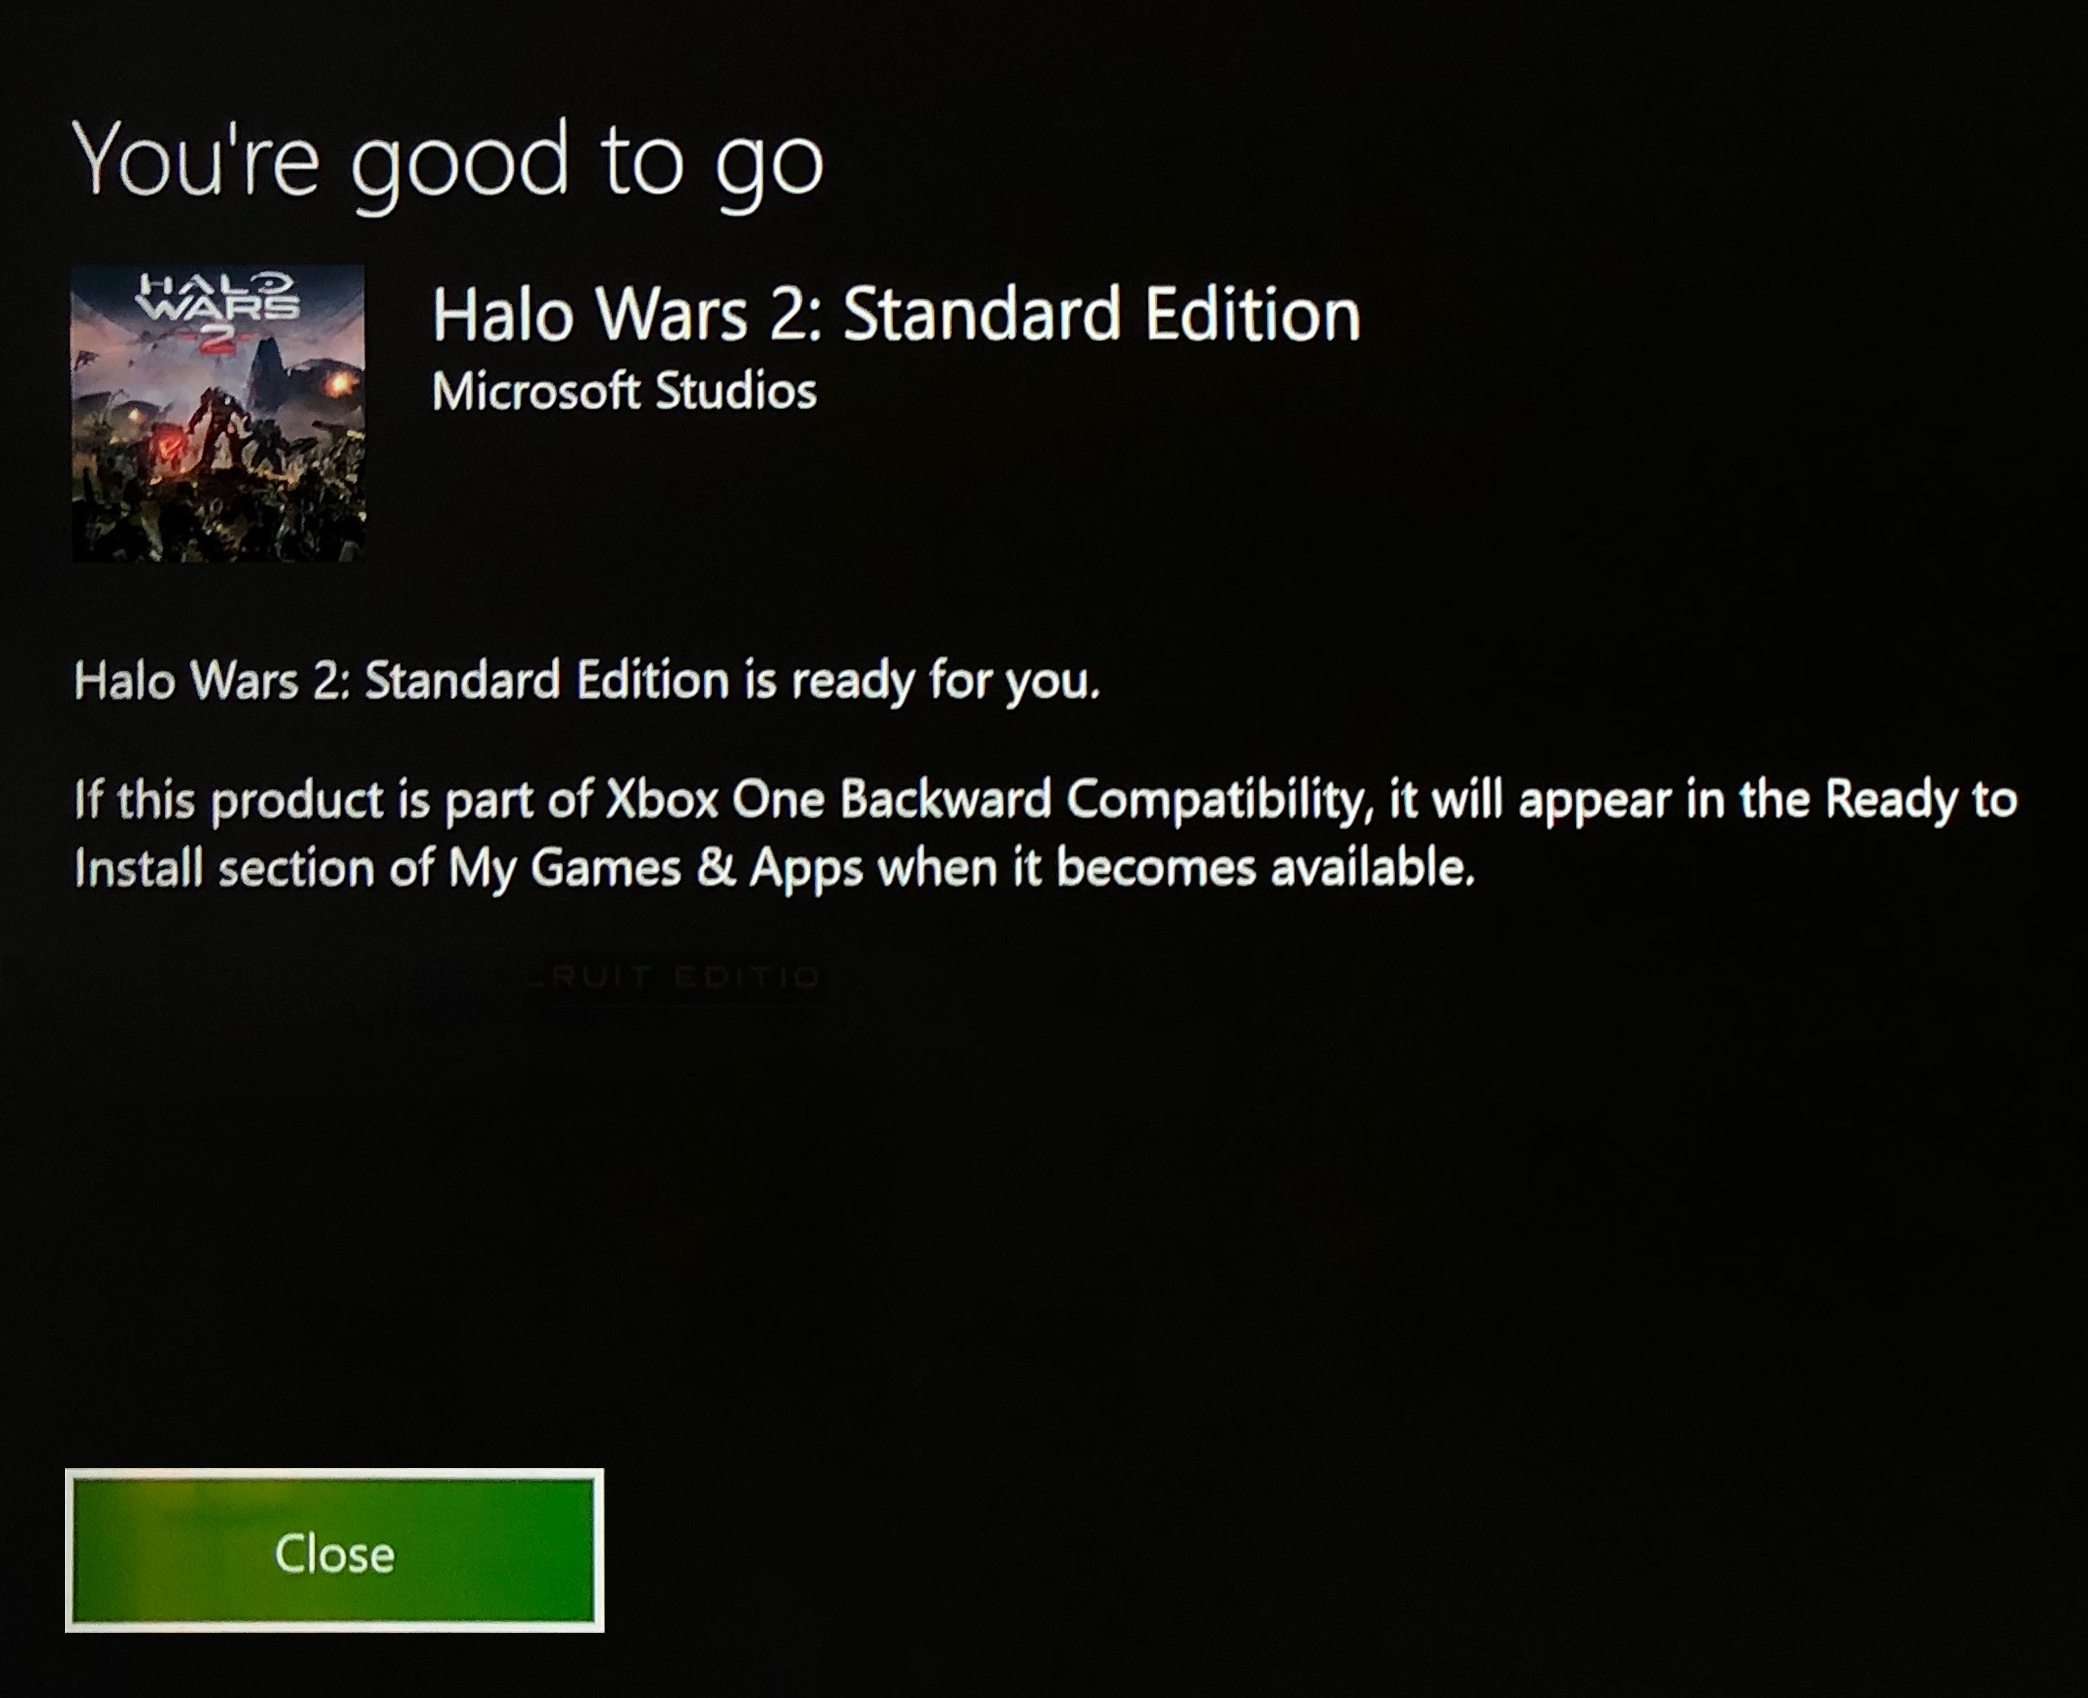 Once the game is activated, Microsoft tells us that the game is validated. We can close the window.